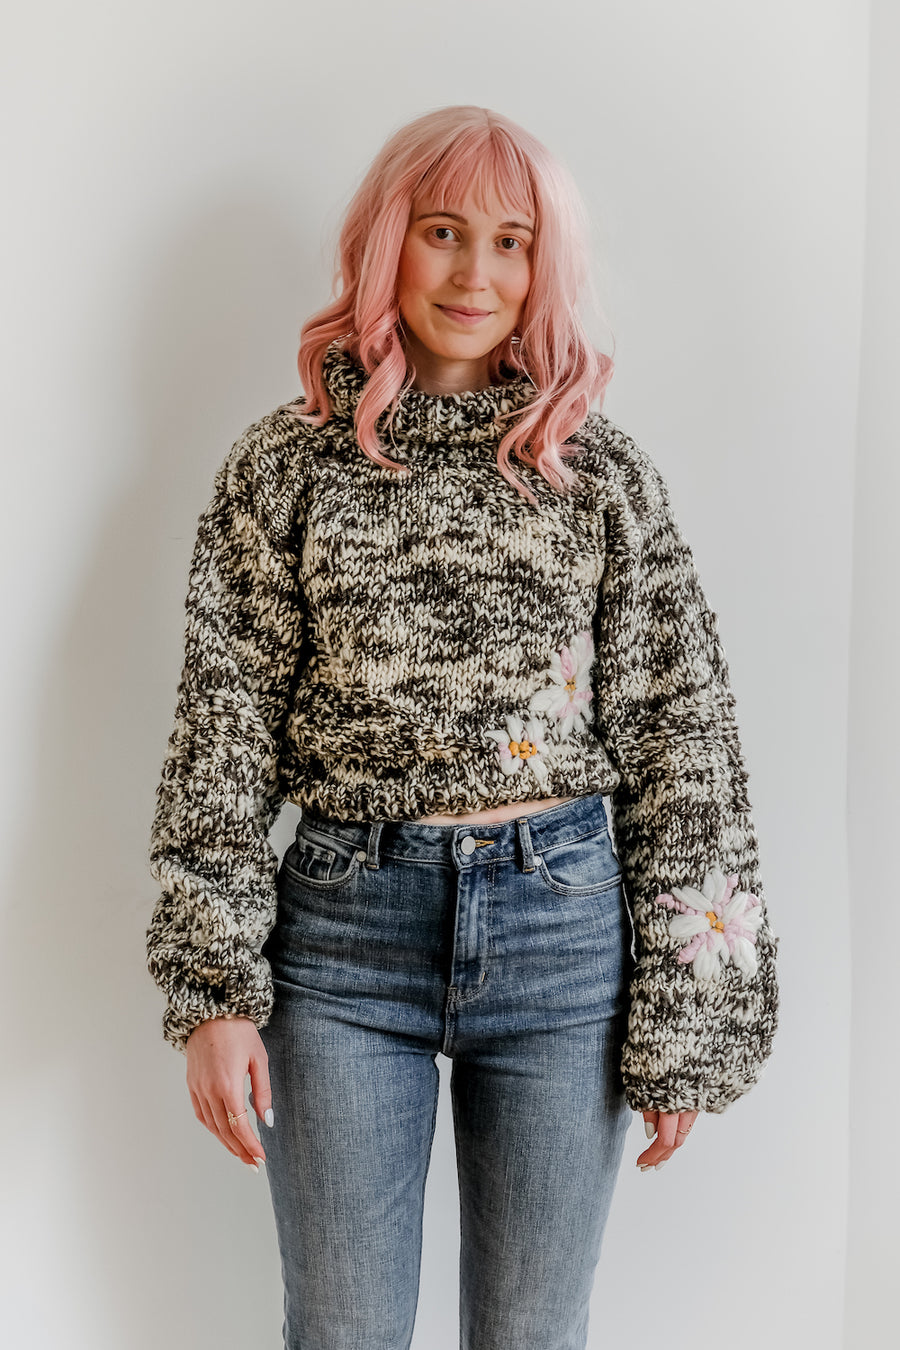 Pepper Floral in Multi 100% Sustainable Sweater - Lex & Lynne